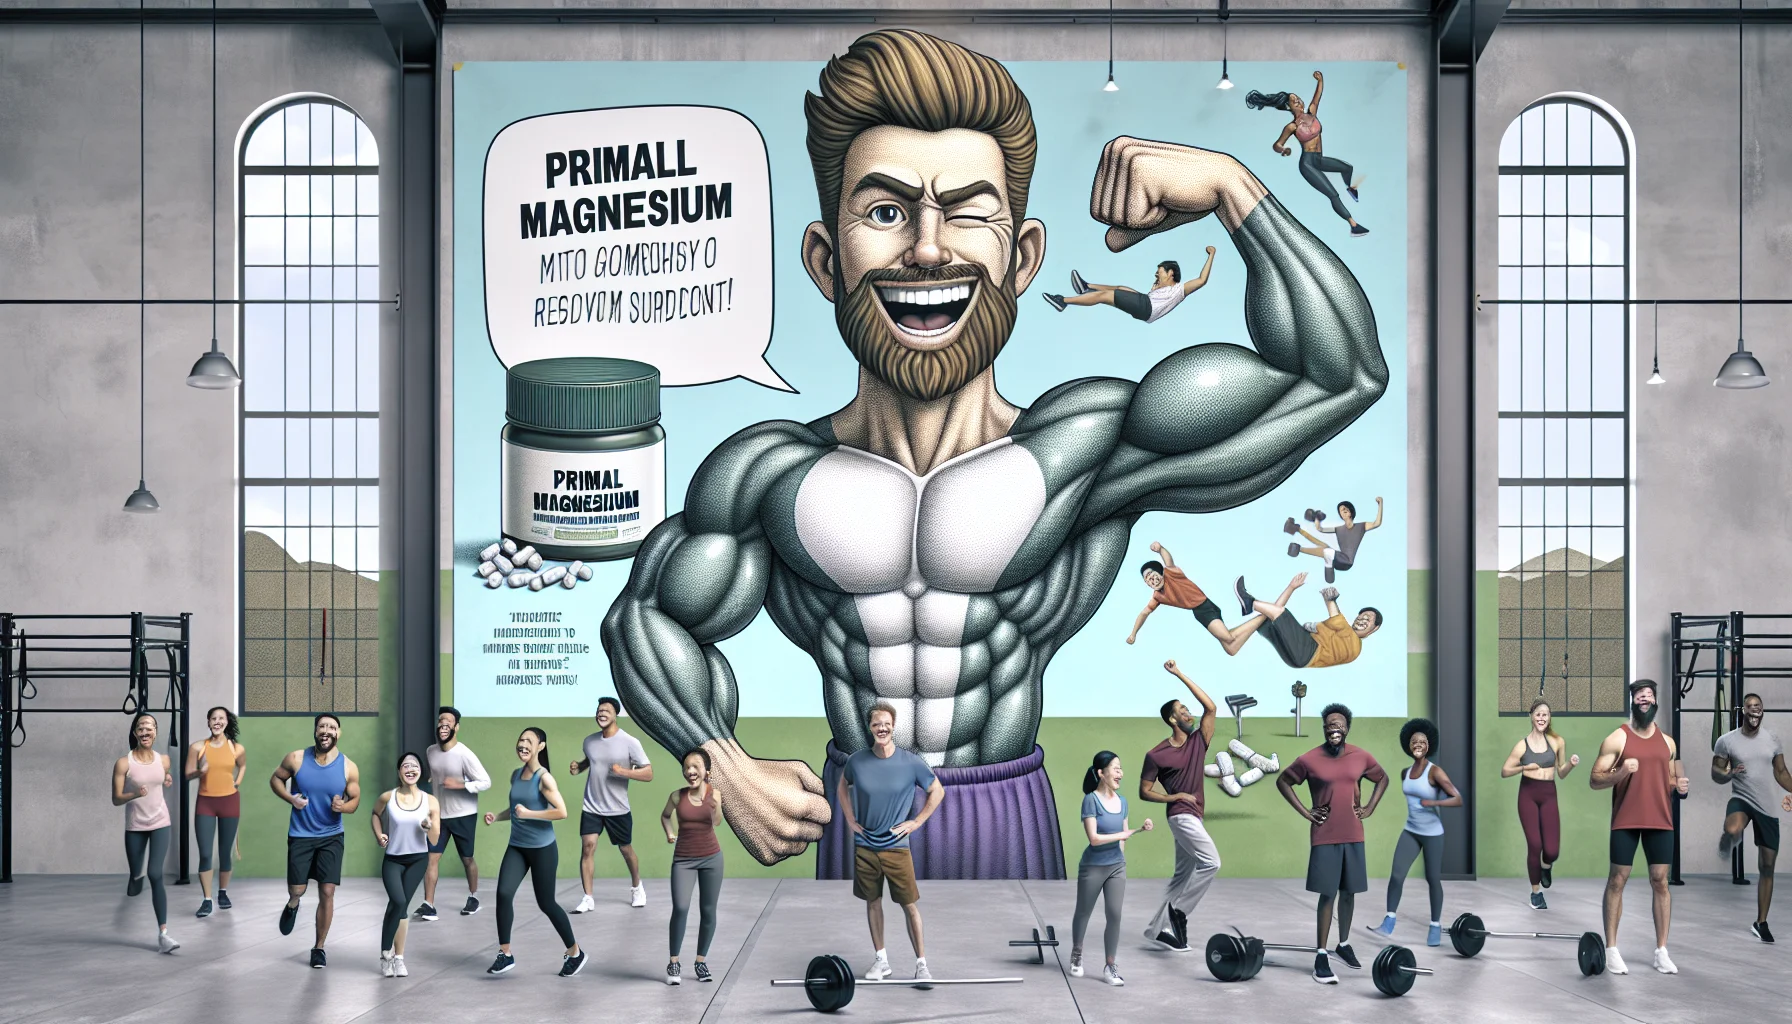 Create an amusing and engaging image displaying primal magnesium embodied as a comical caricature. The caricature is flexing its muscles, winking at the camera, and encouraging people to incorporate magnesium supplements into their exercise routine. The manicured backdrop consists of a well-equipped gym complemented by inspiring fitness quotes plastered on the walls. Diverse individuals of differing descents, like Hispanic, Asian, and Middle-Eastern, differing genders, and ages are involved in various sports activities while showcasing a burst of energy thanks to the magnesium supplement.